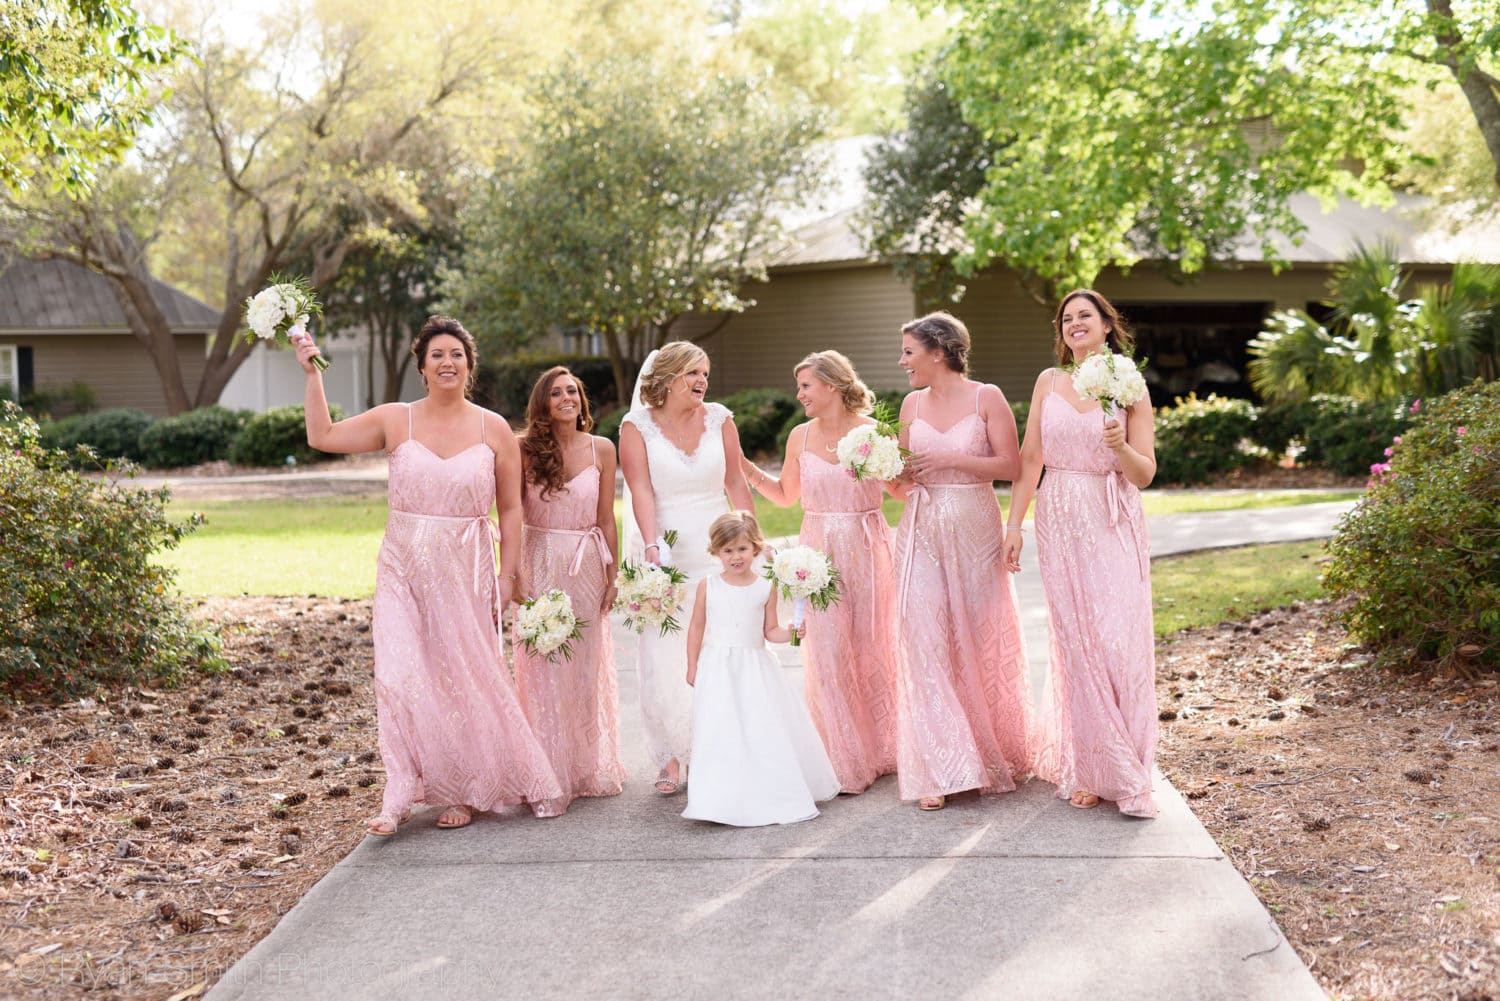 Bridesmaids having fun together after the ceremony - Pawleys Plantation